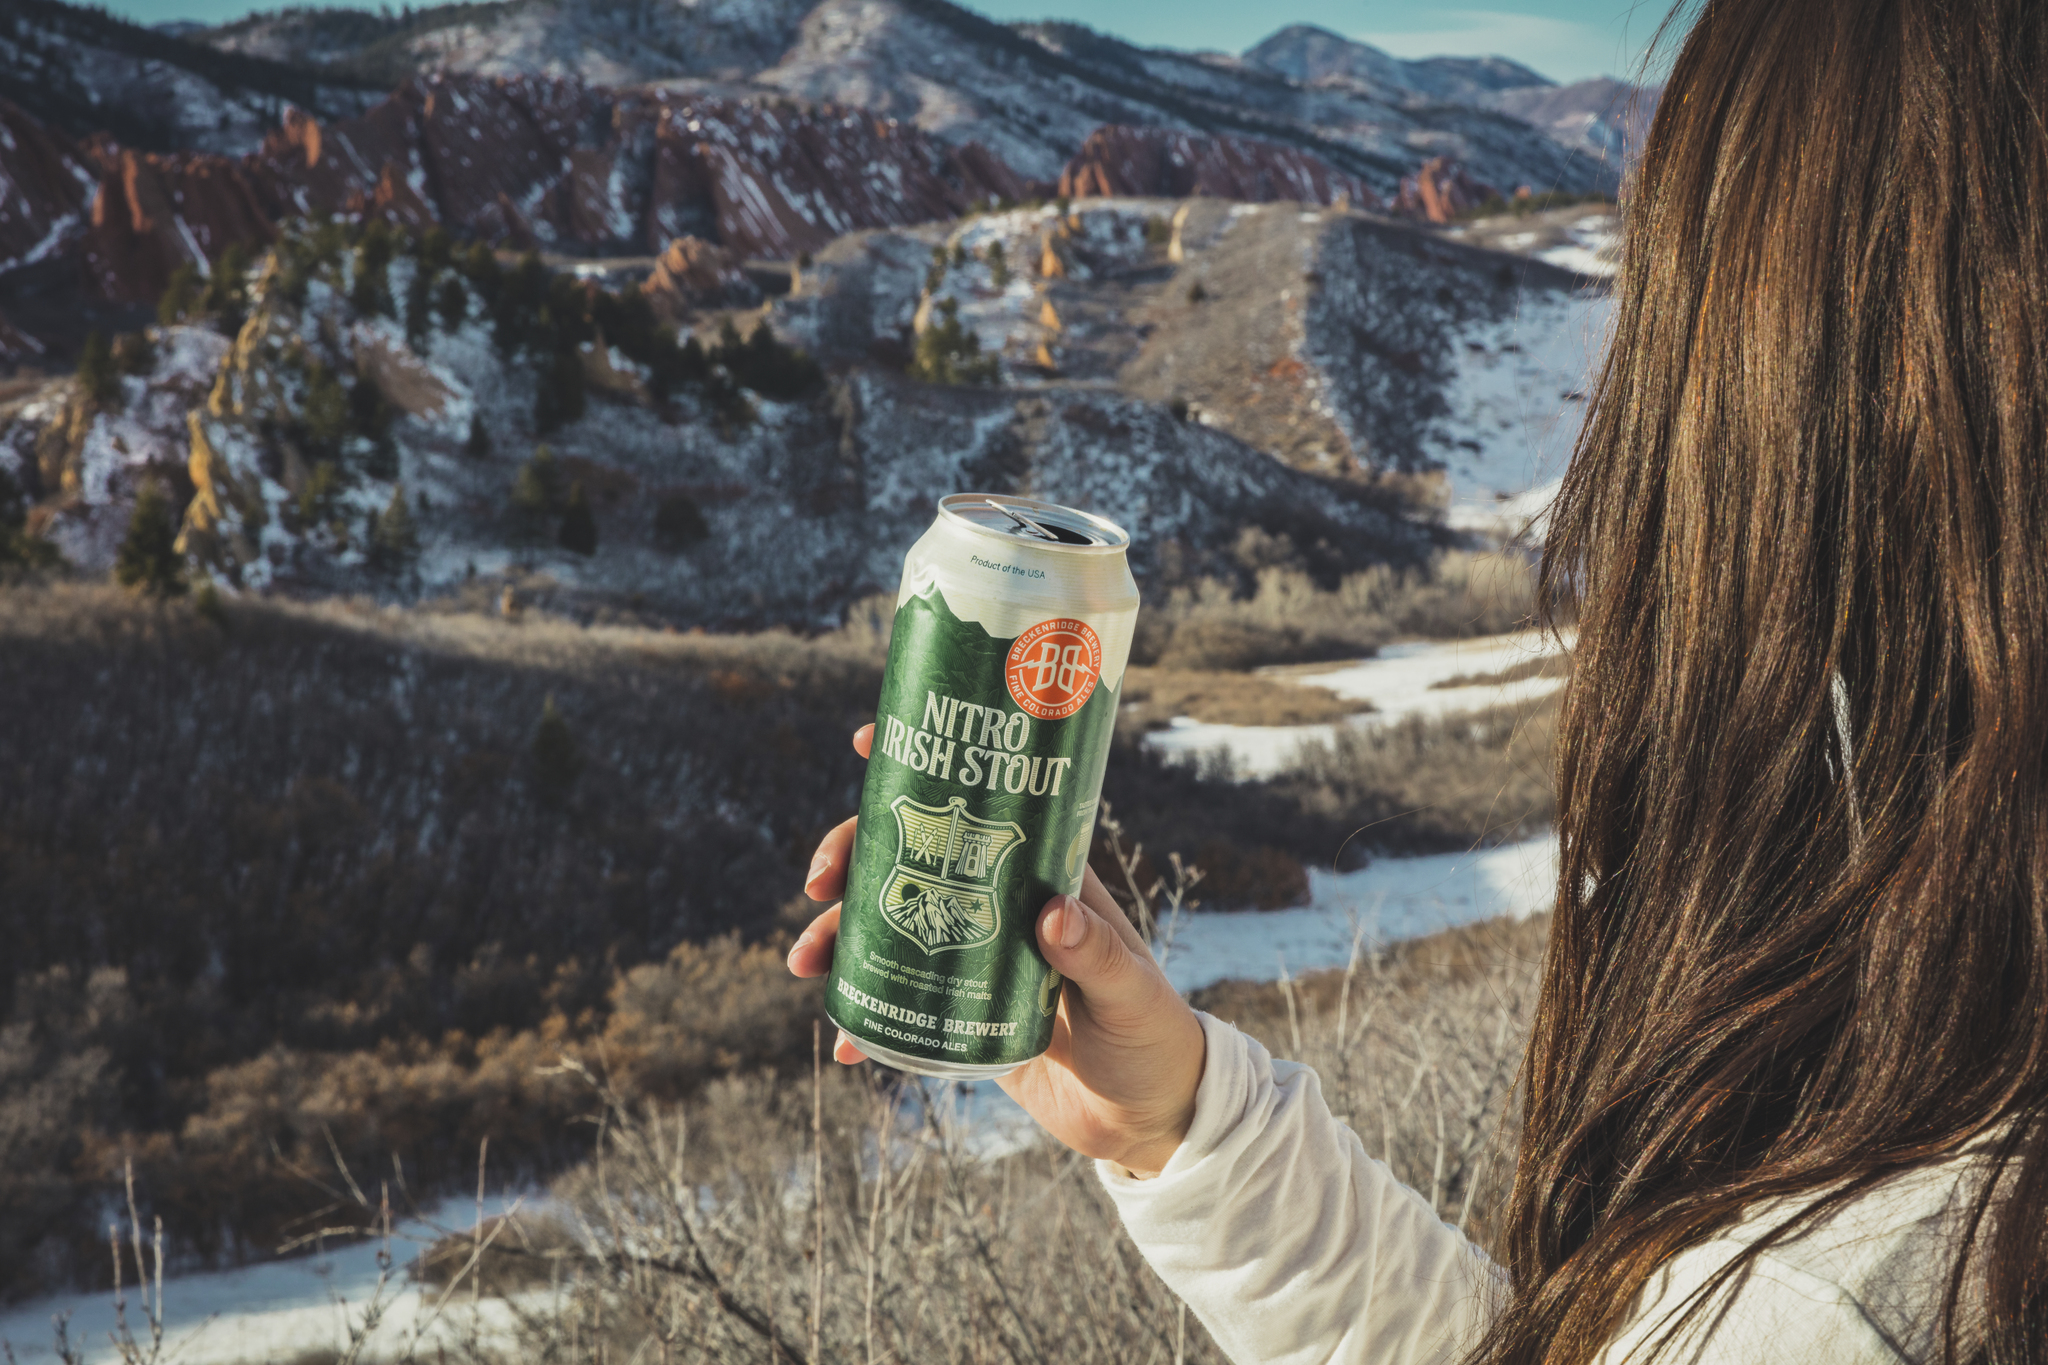 BRECKENRIDGE BREWERY CHANNELS THE LUCK OF THE IRISH WITH NITRO IRISH STOUT AND GO GOLD SWEEPSTAKES